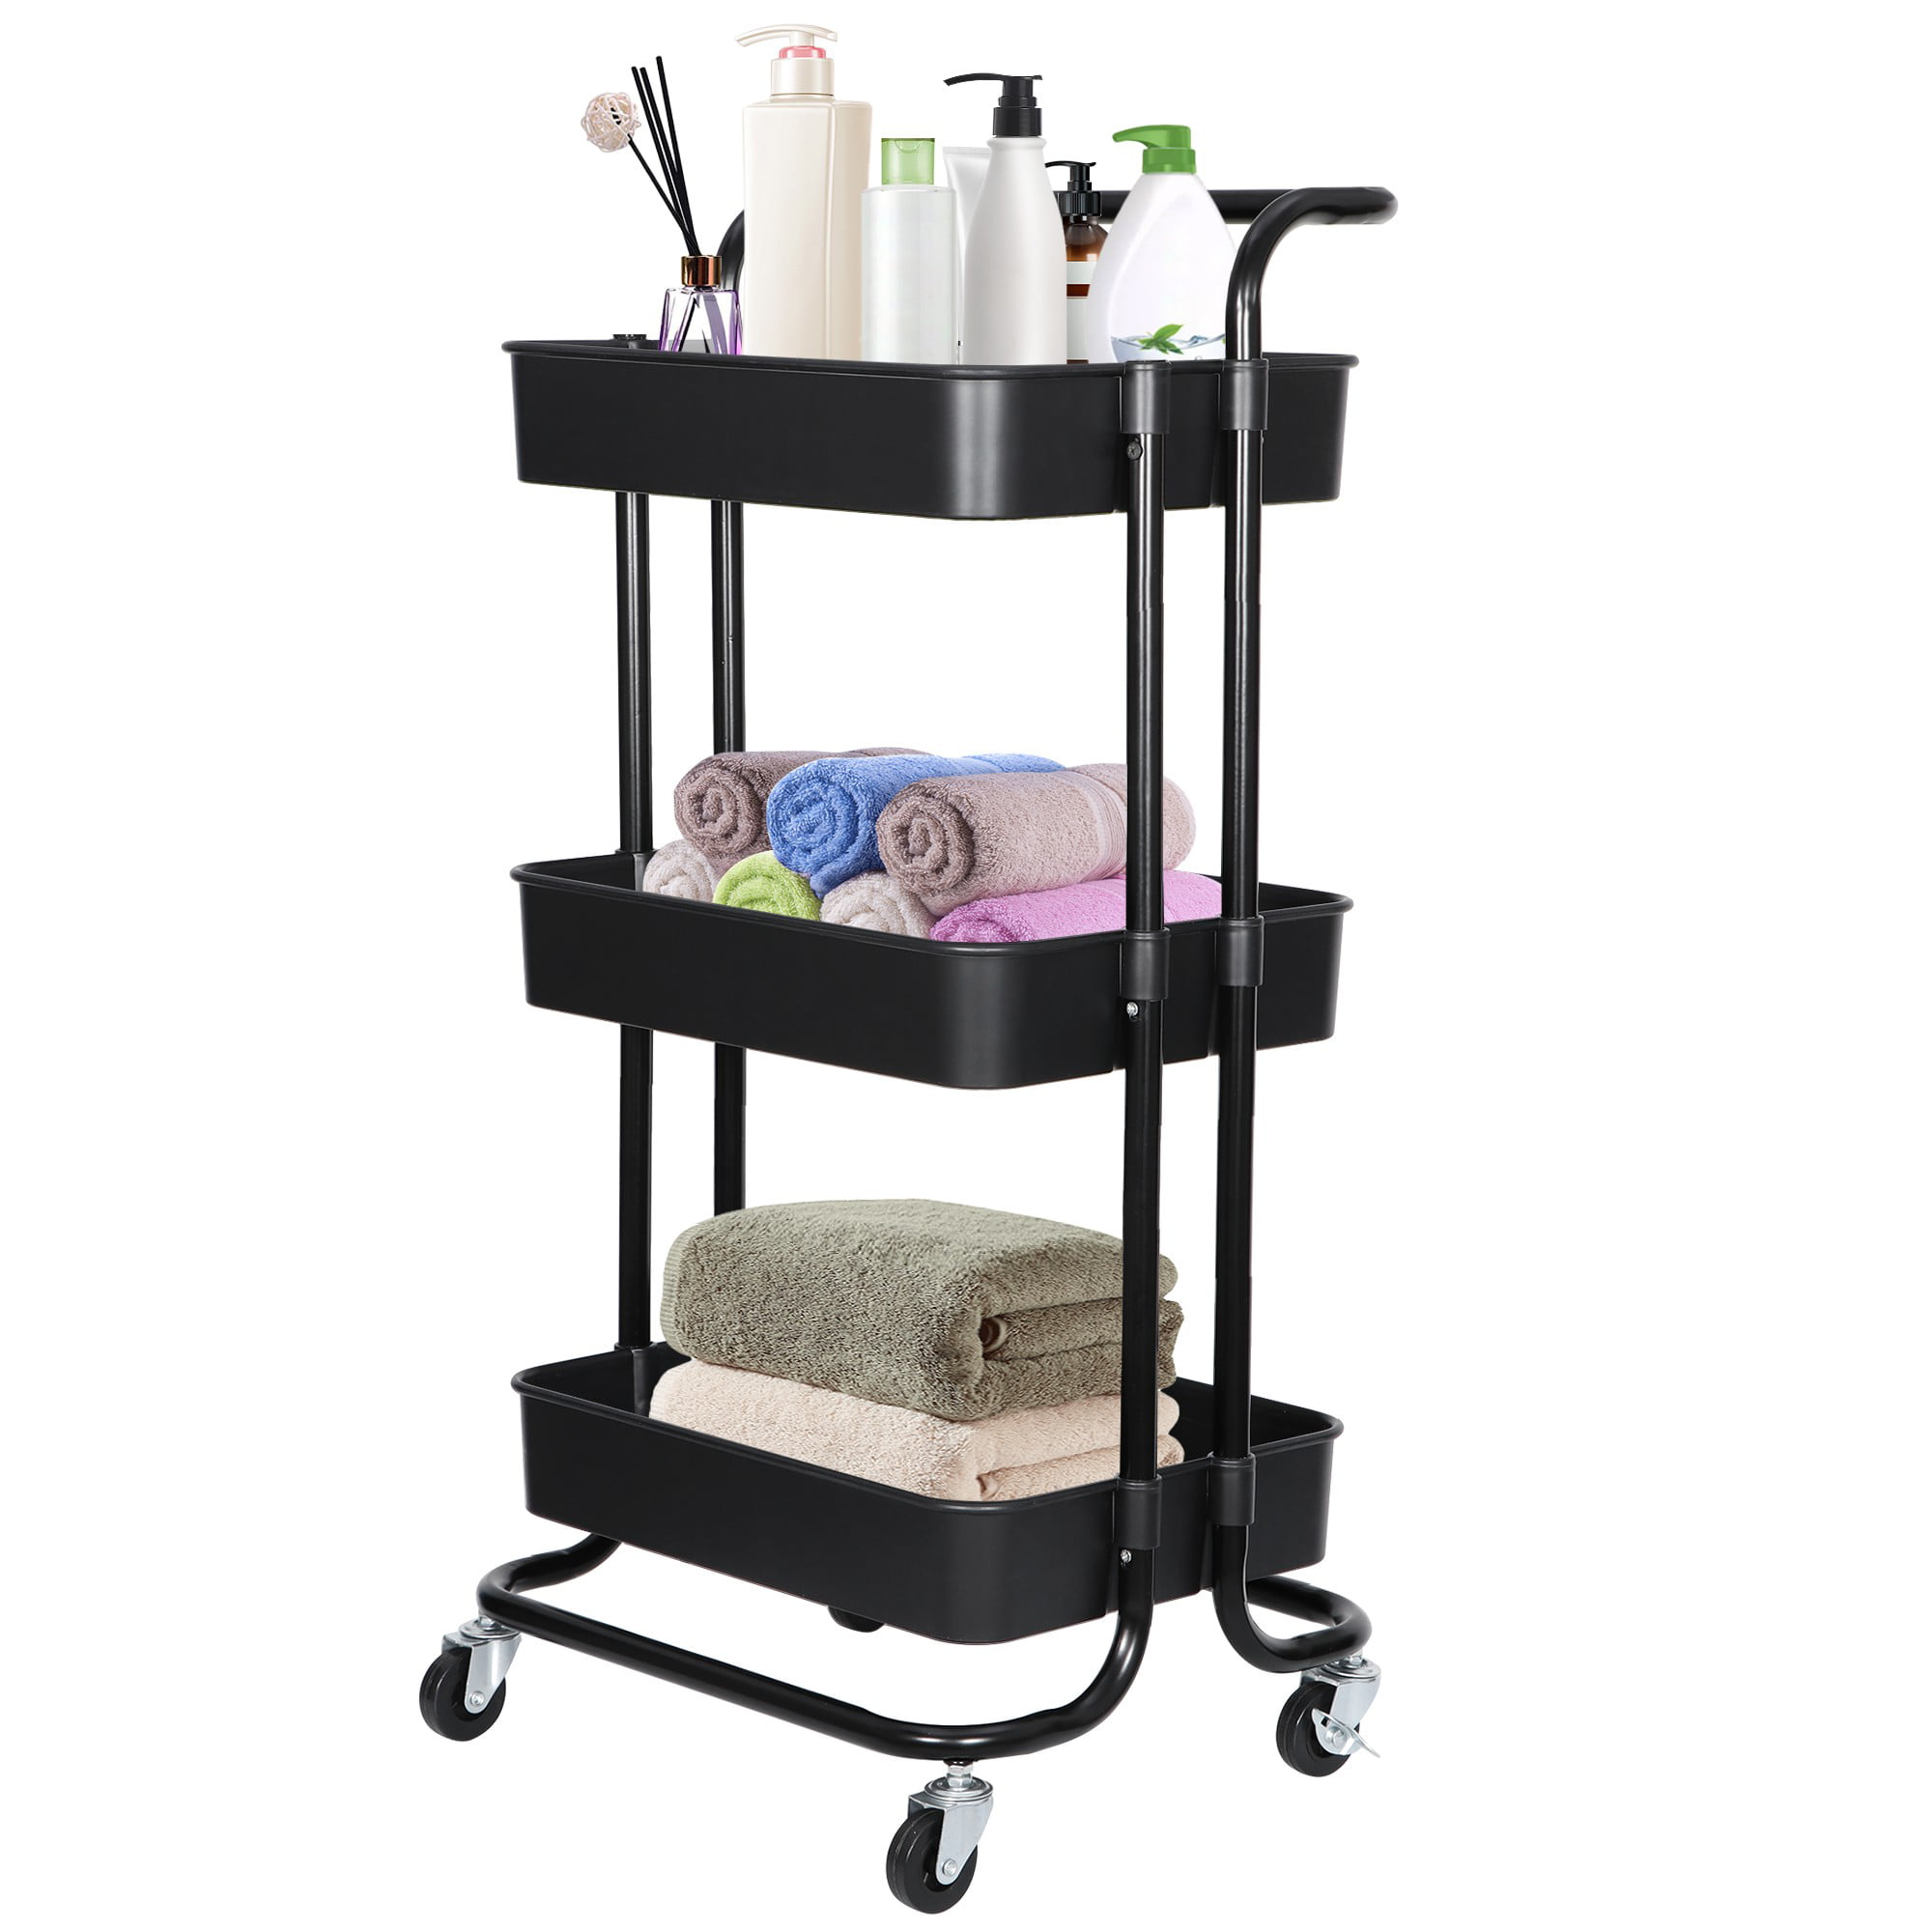 Meet Perfect Storage PUNP Heavy Duty Metal 2 Tier Rolling Cart Storage Shelves with Cover Board & Casters Utility Storage Shelves Rolling Cart